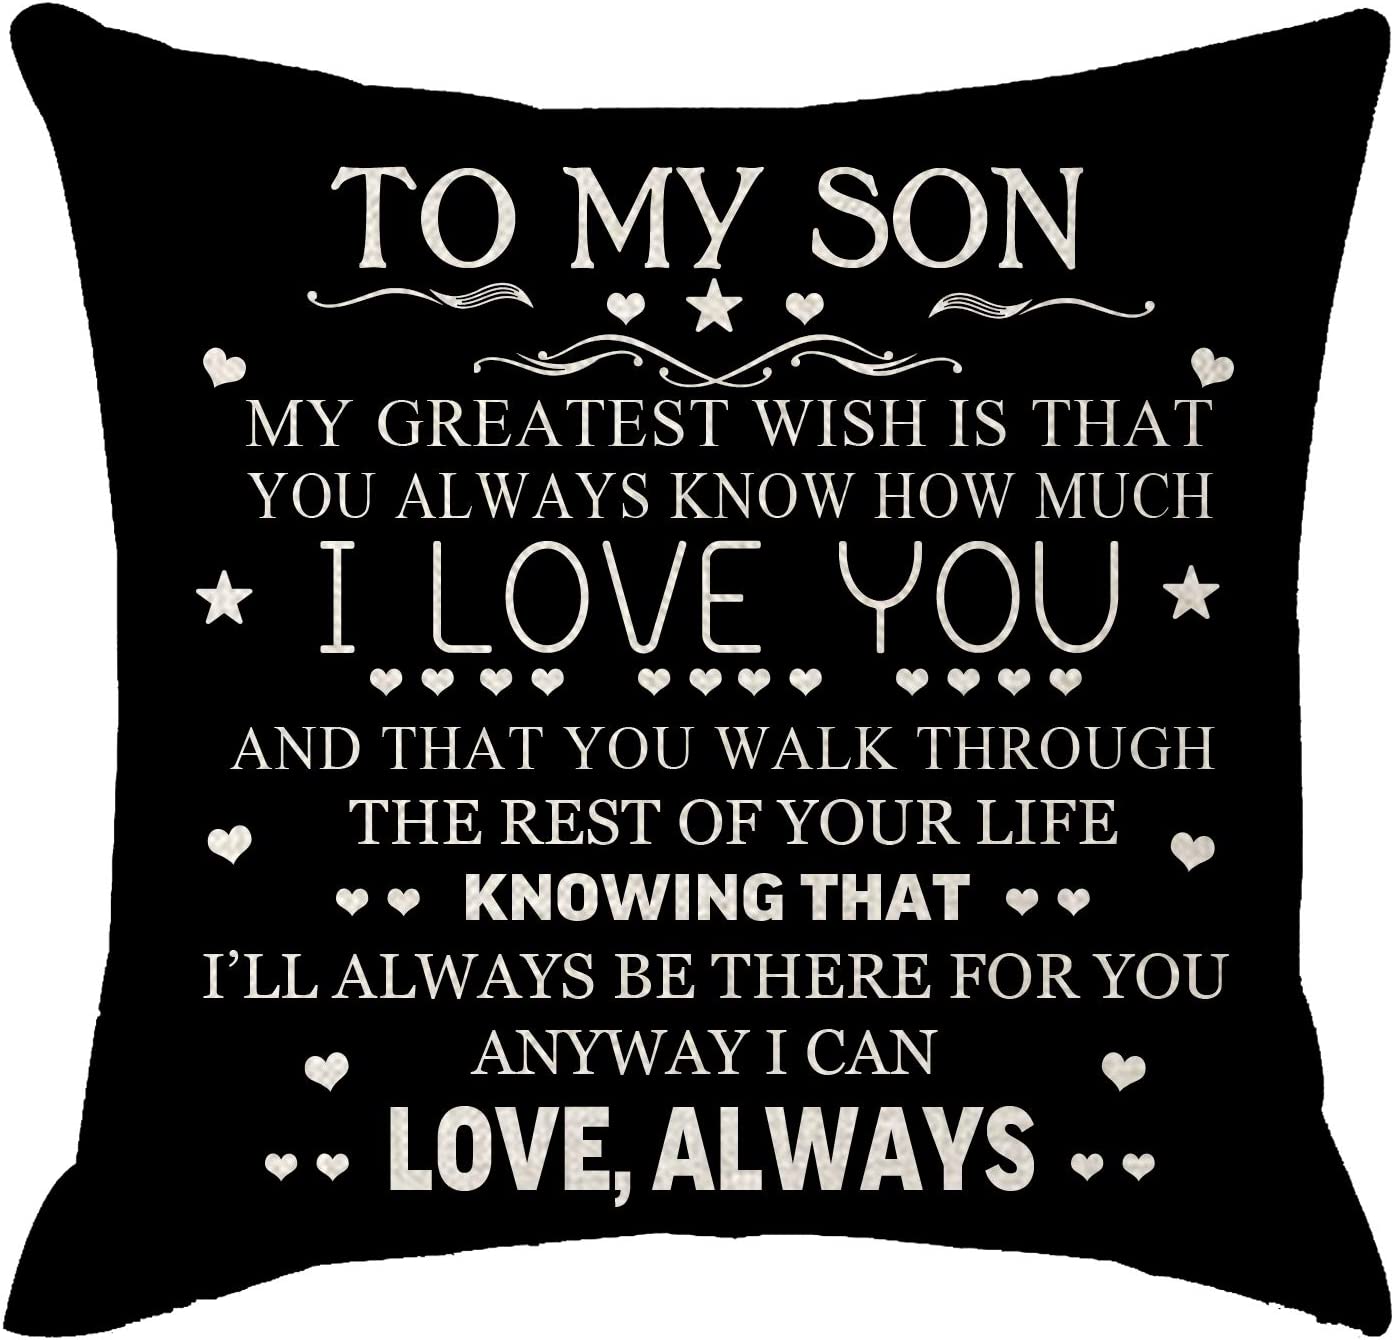 To My Son Pillow